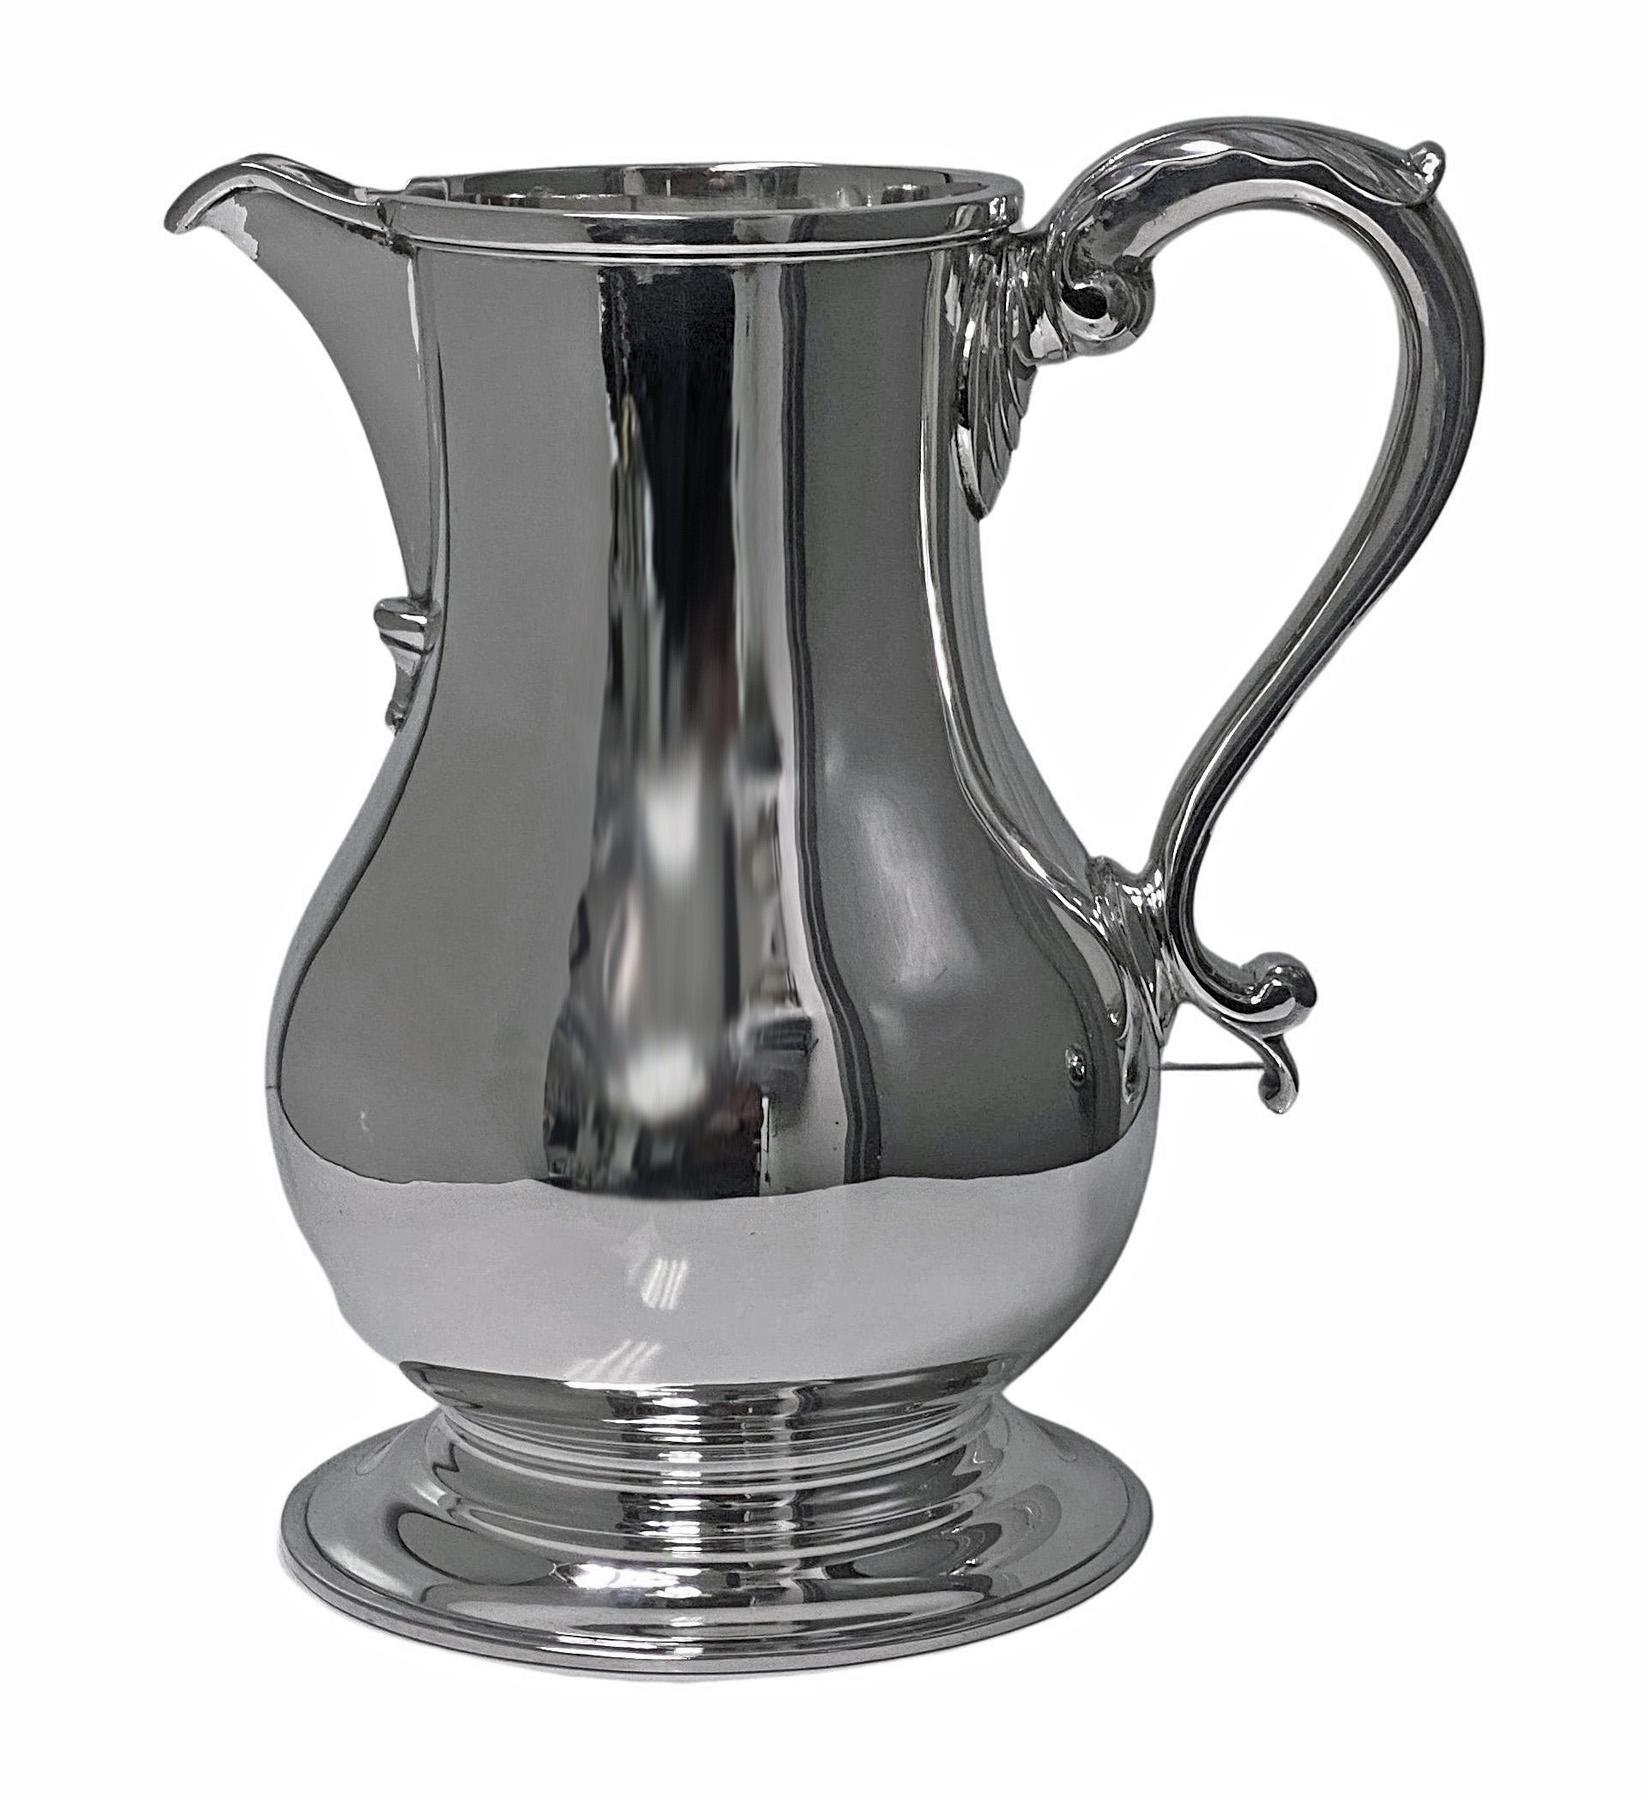 Georgian style sterling silver water/wine/beer Jug, London 1971 Wakely and Wheeler 36.25 oz. Large heavy impressive, plain baluster form on circular spreading foot, S scroll handle with acanthus thumb piece, plain moulded rim, and spout. Measures: